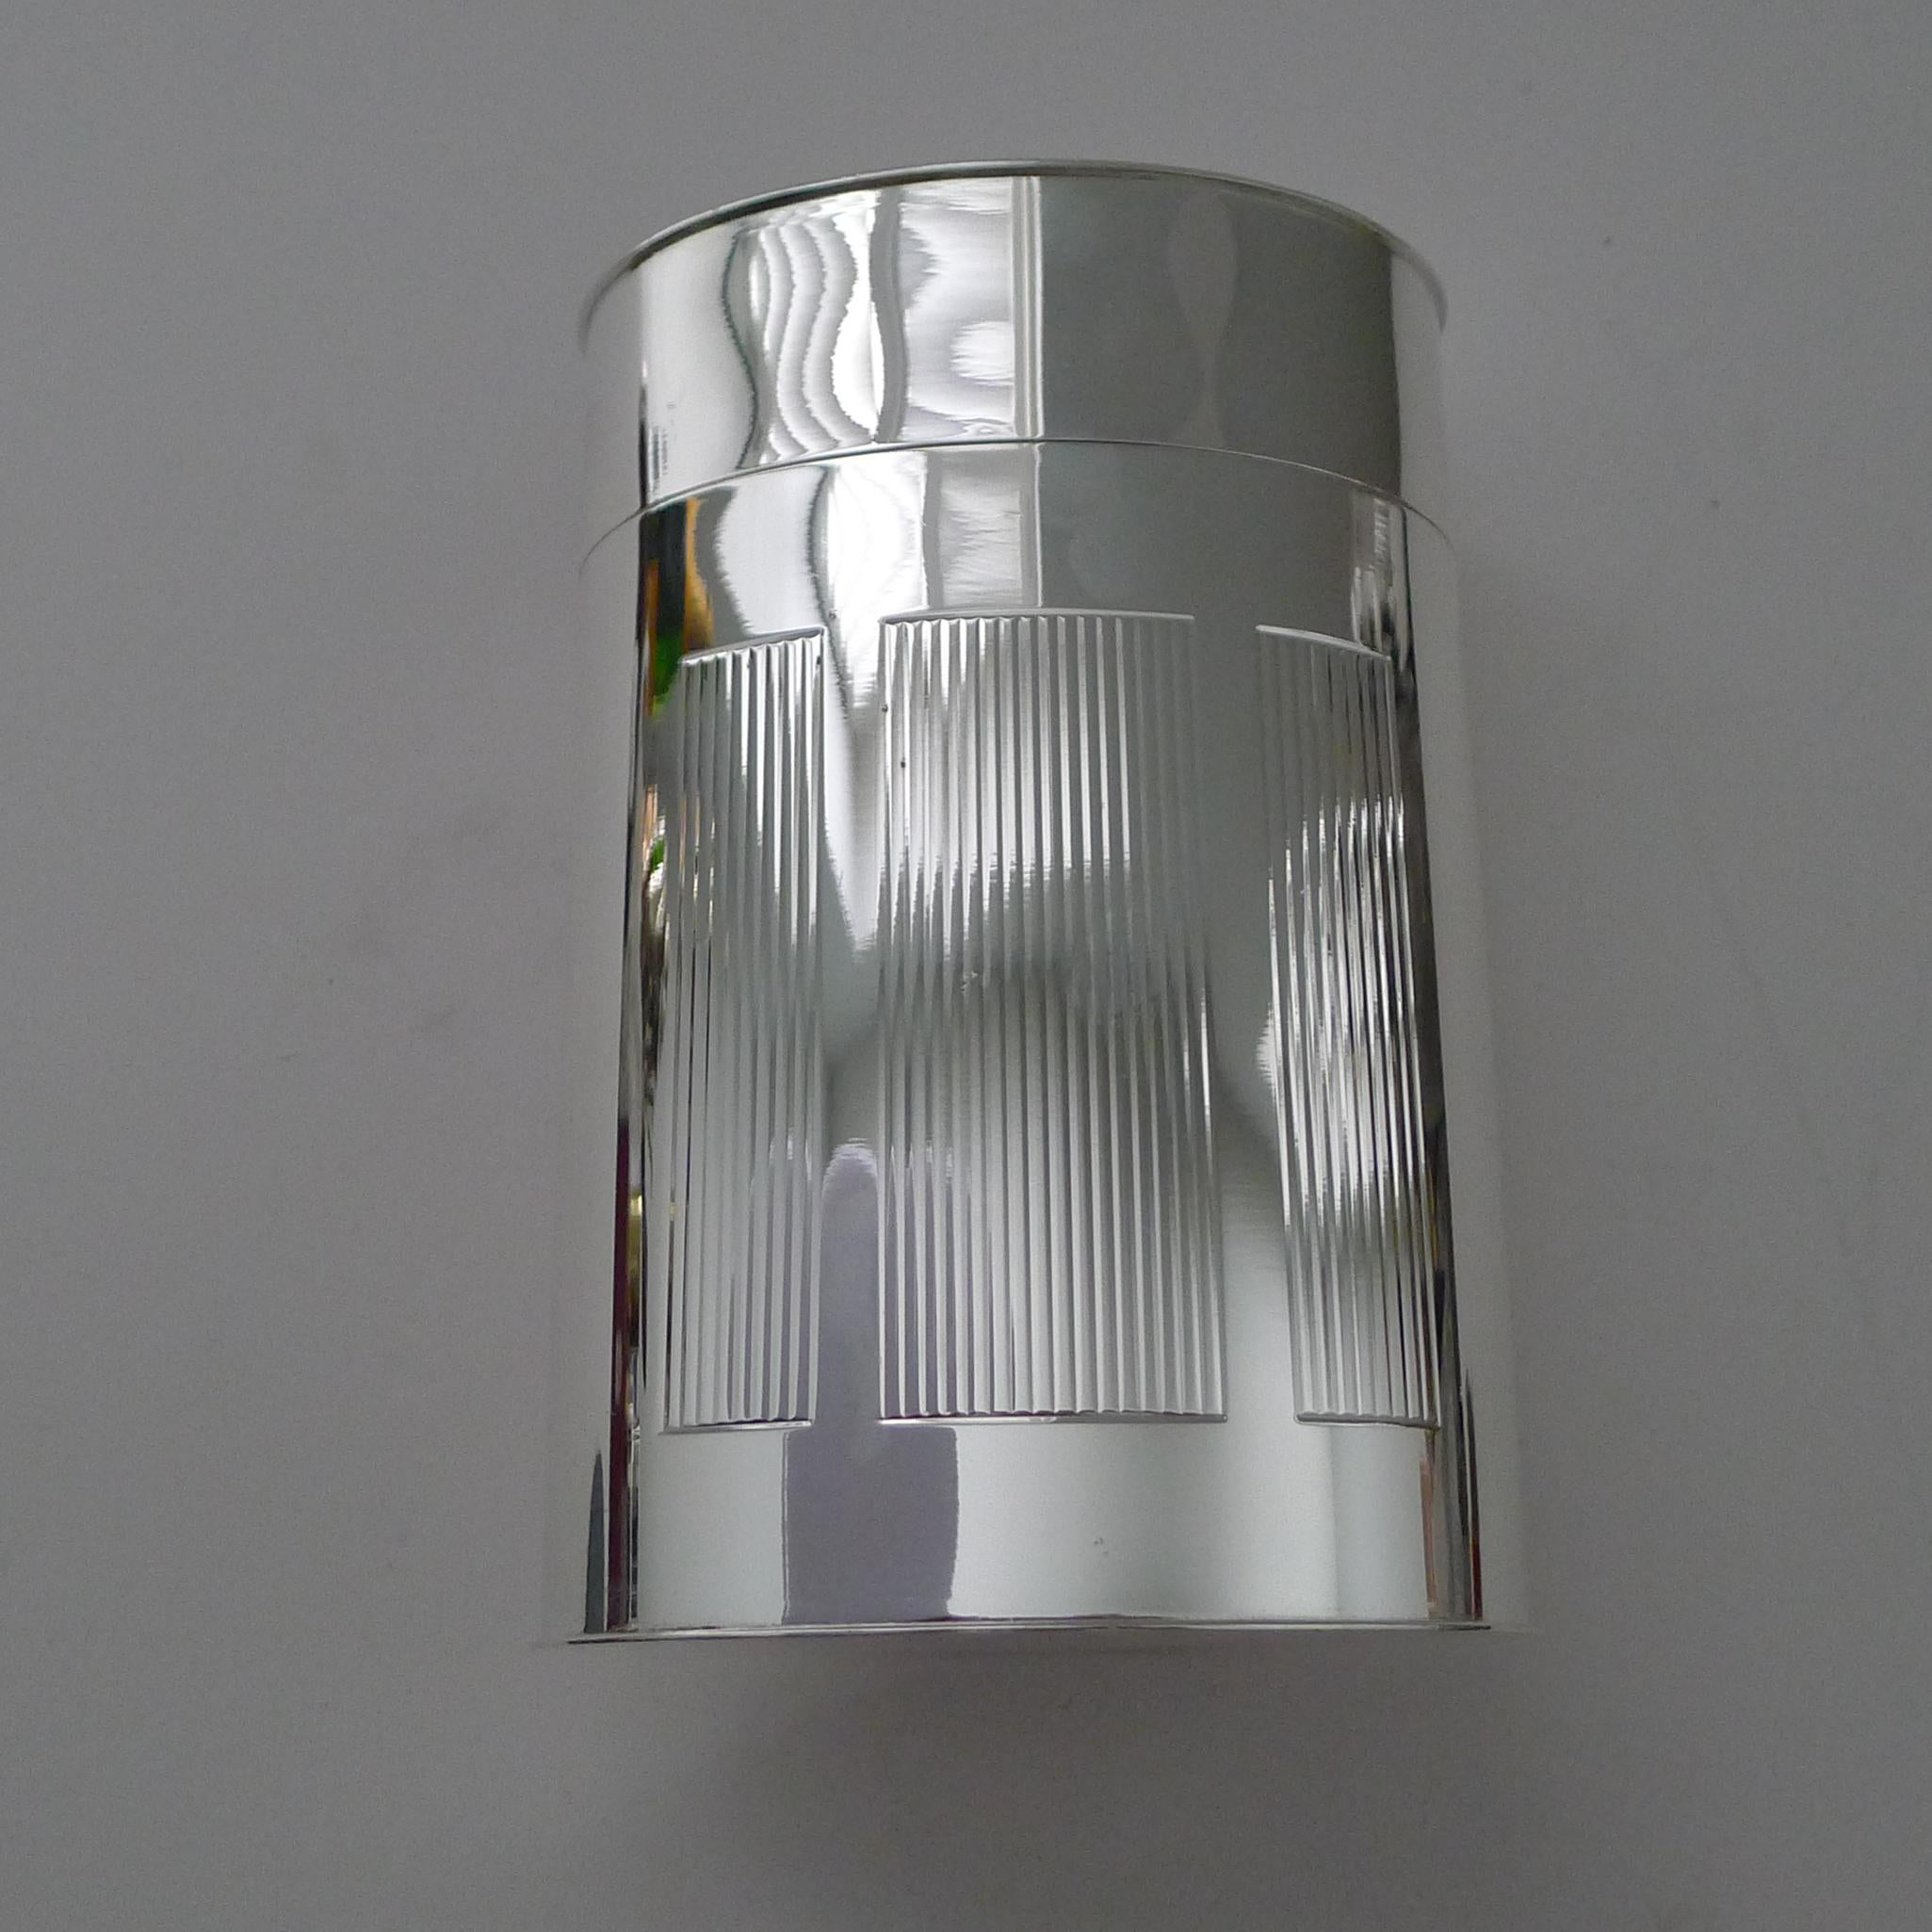 French Modernist Silver Plated Cigar Box by Crevillen, Paris c.1960 For Sale 1